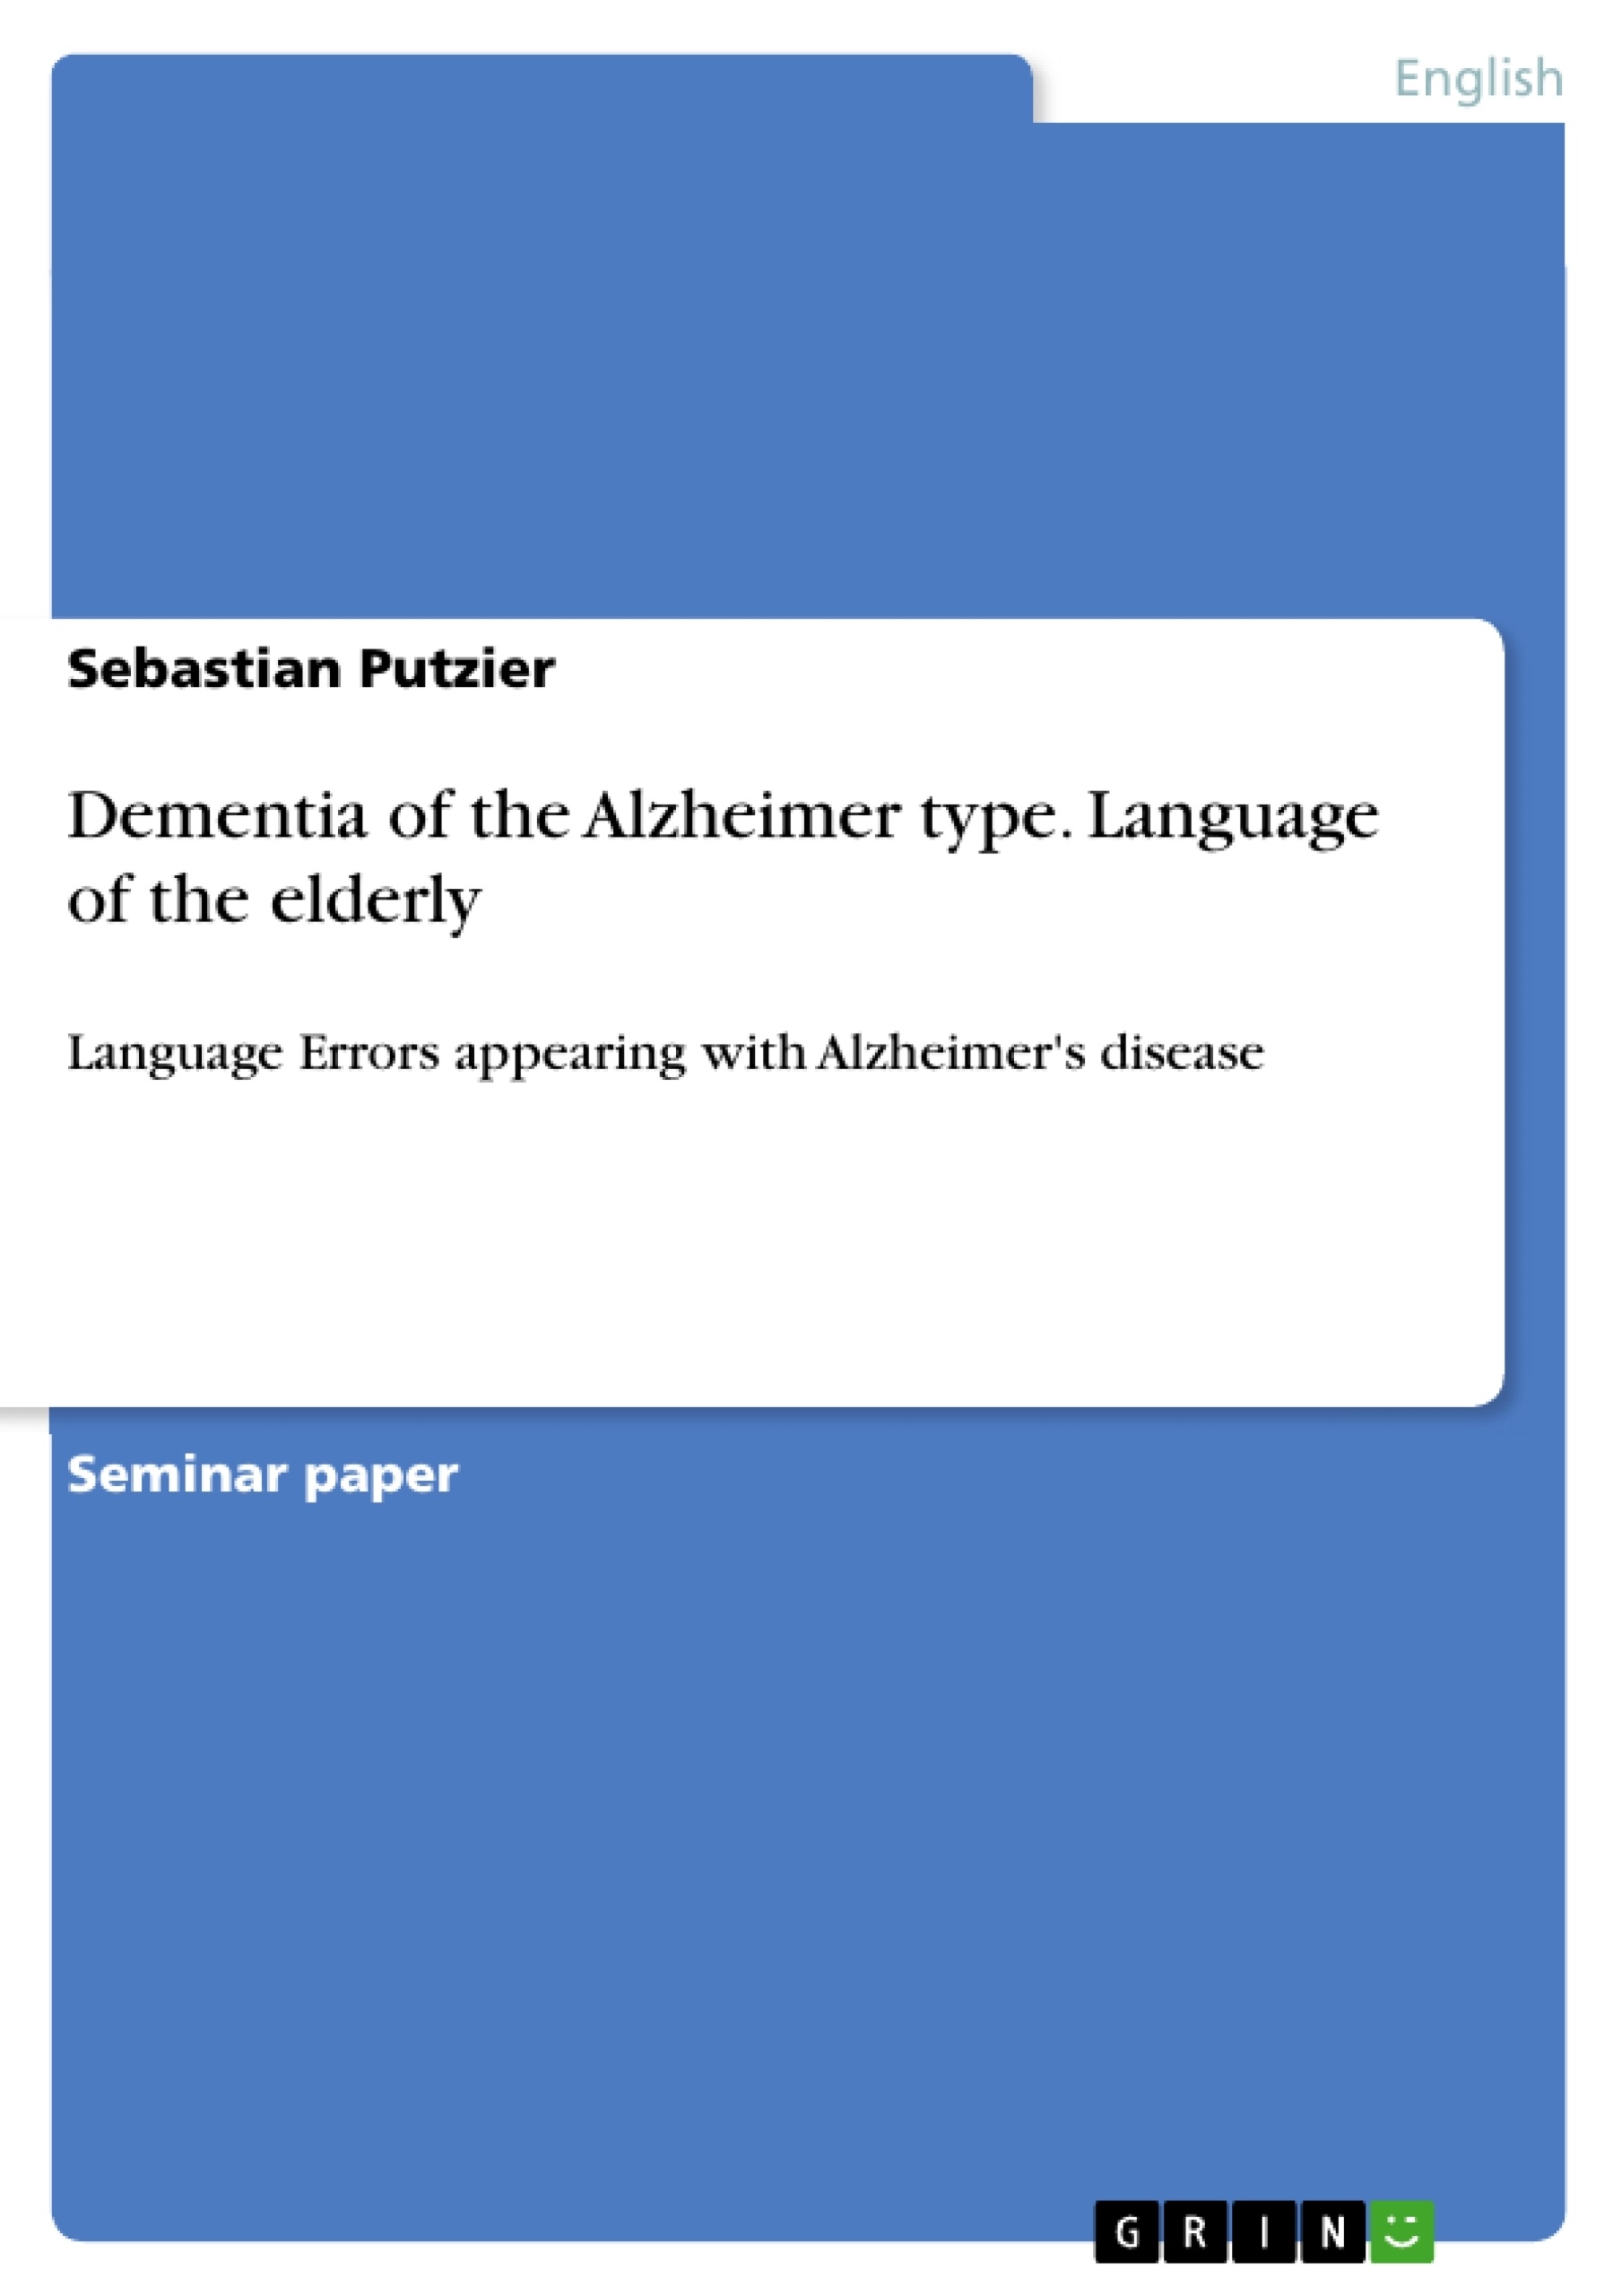 Titre: Dementia of the Alzheimer type. Language of the elderly